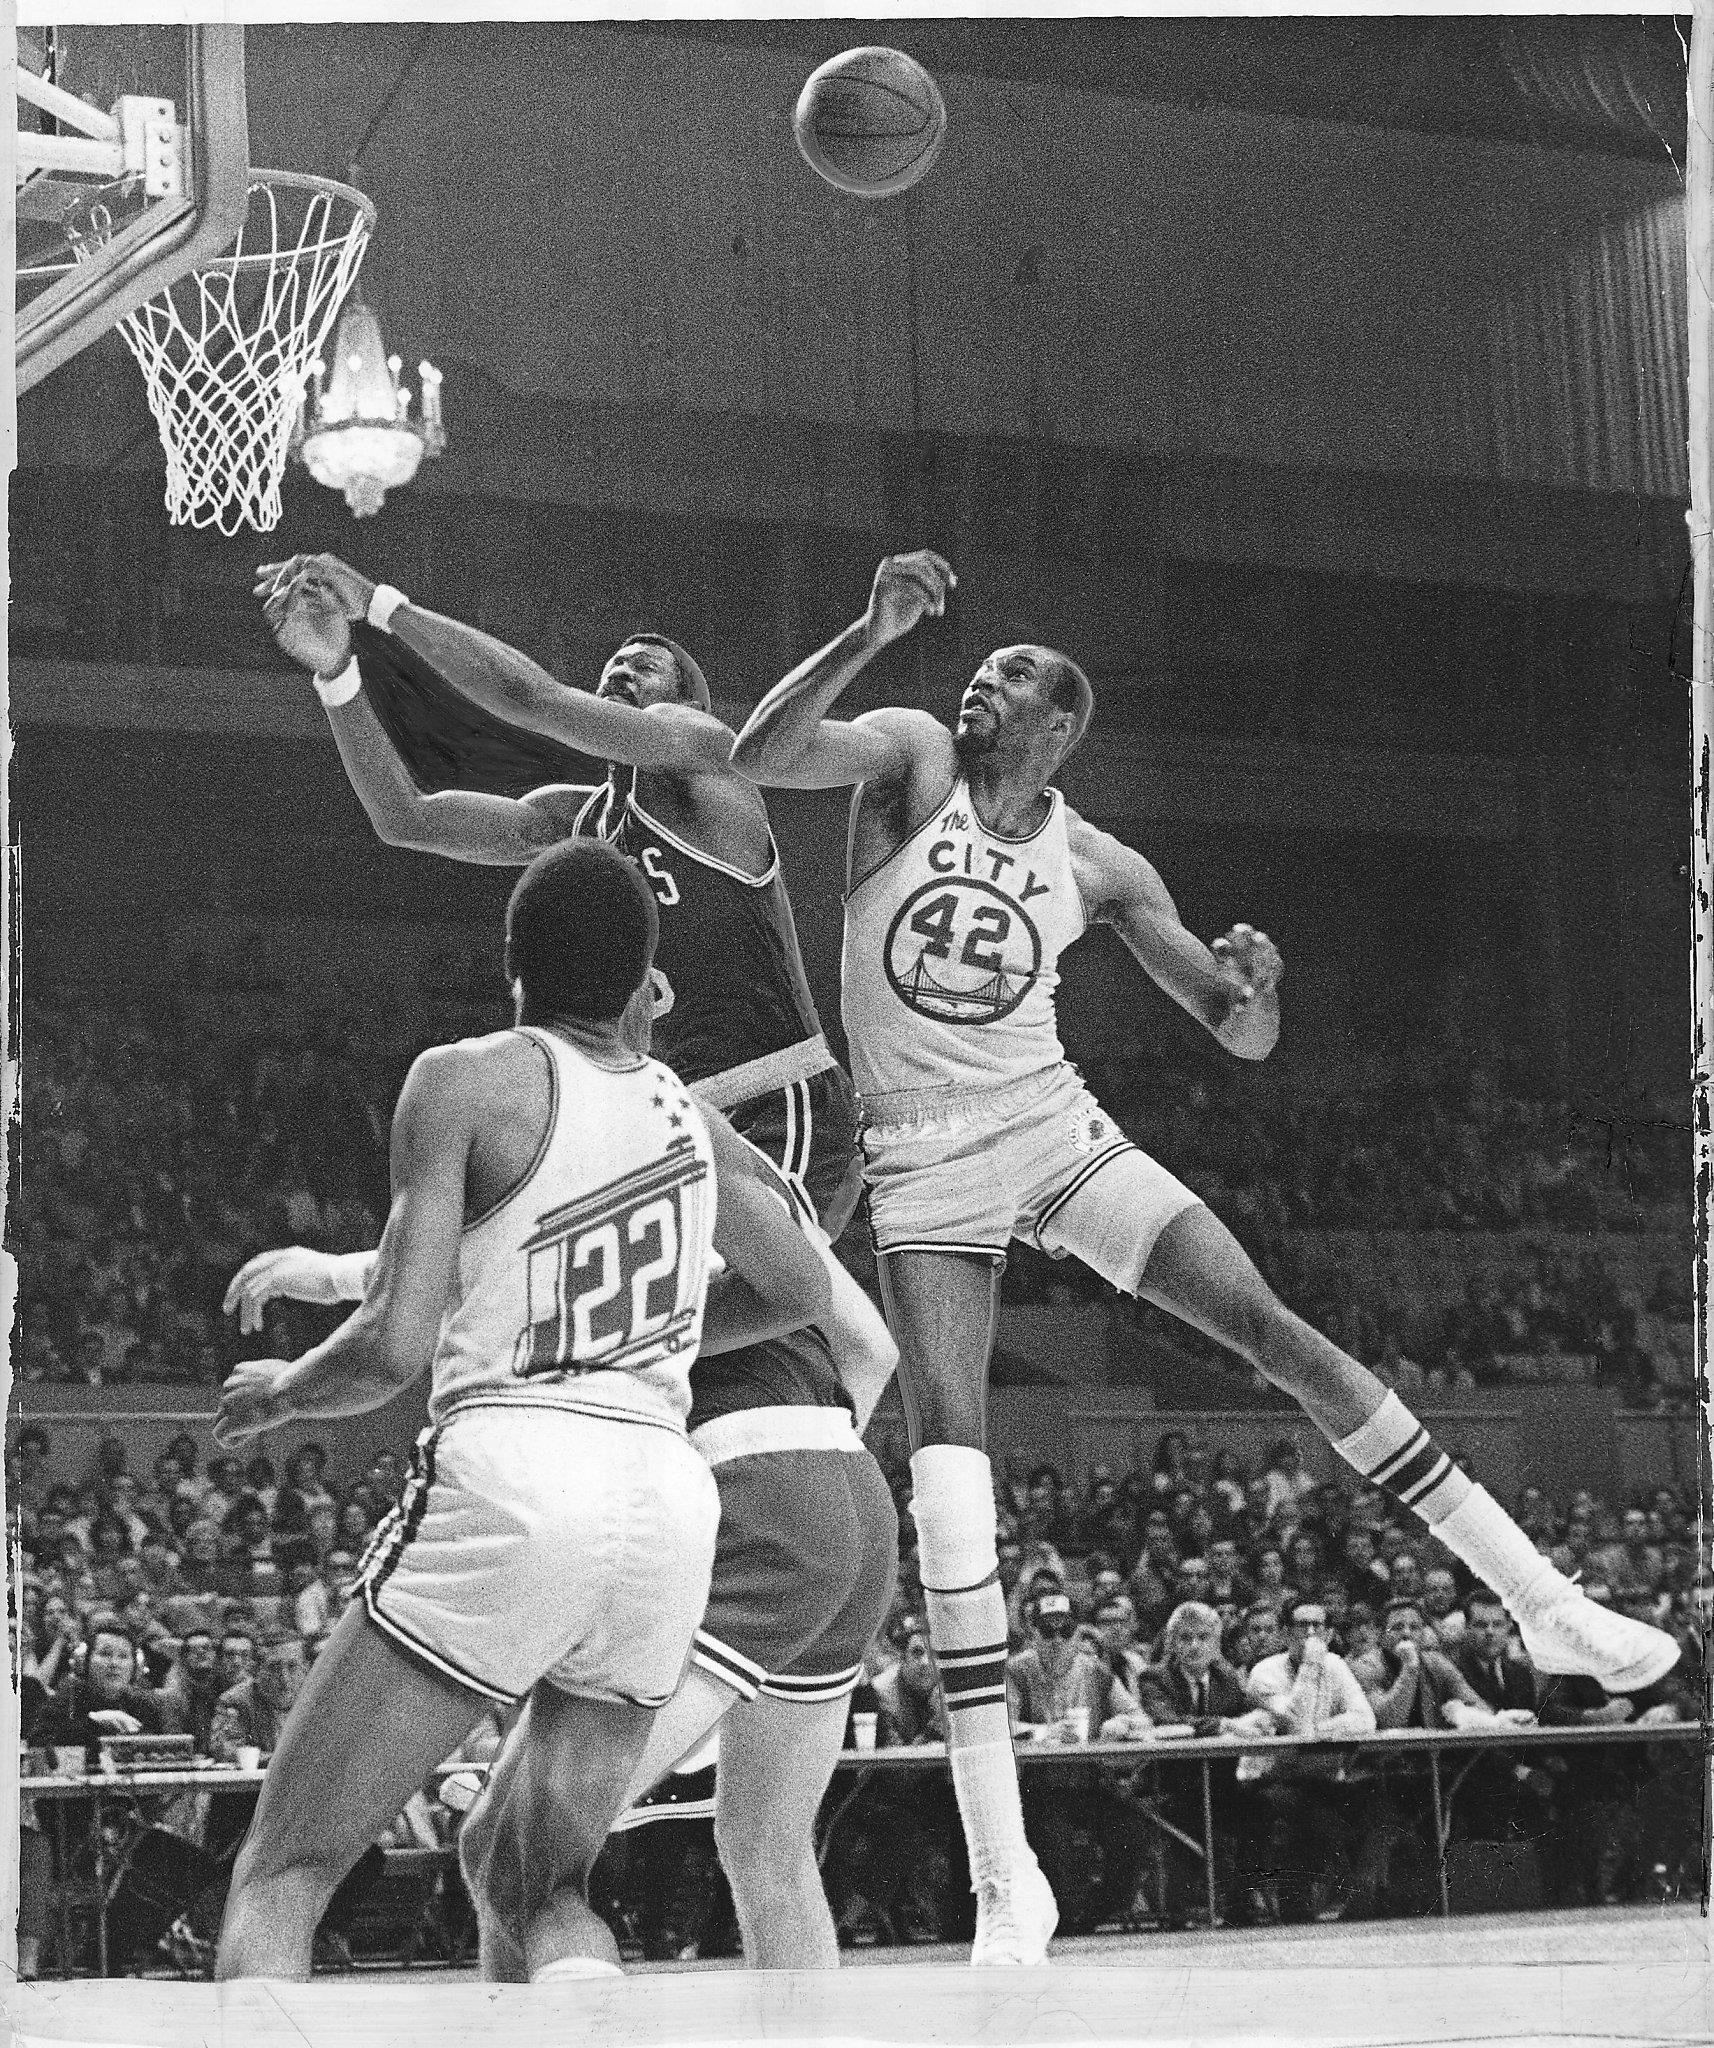 NBA great Nate Thurmond, Hall of Fame center and former Bull, dies at 74